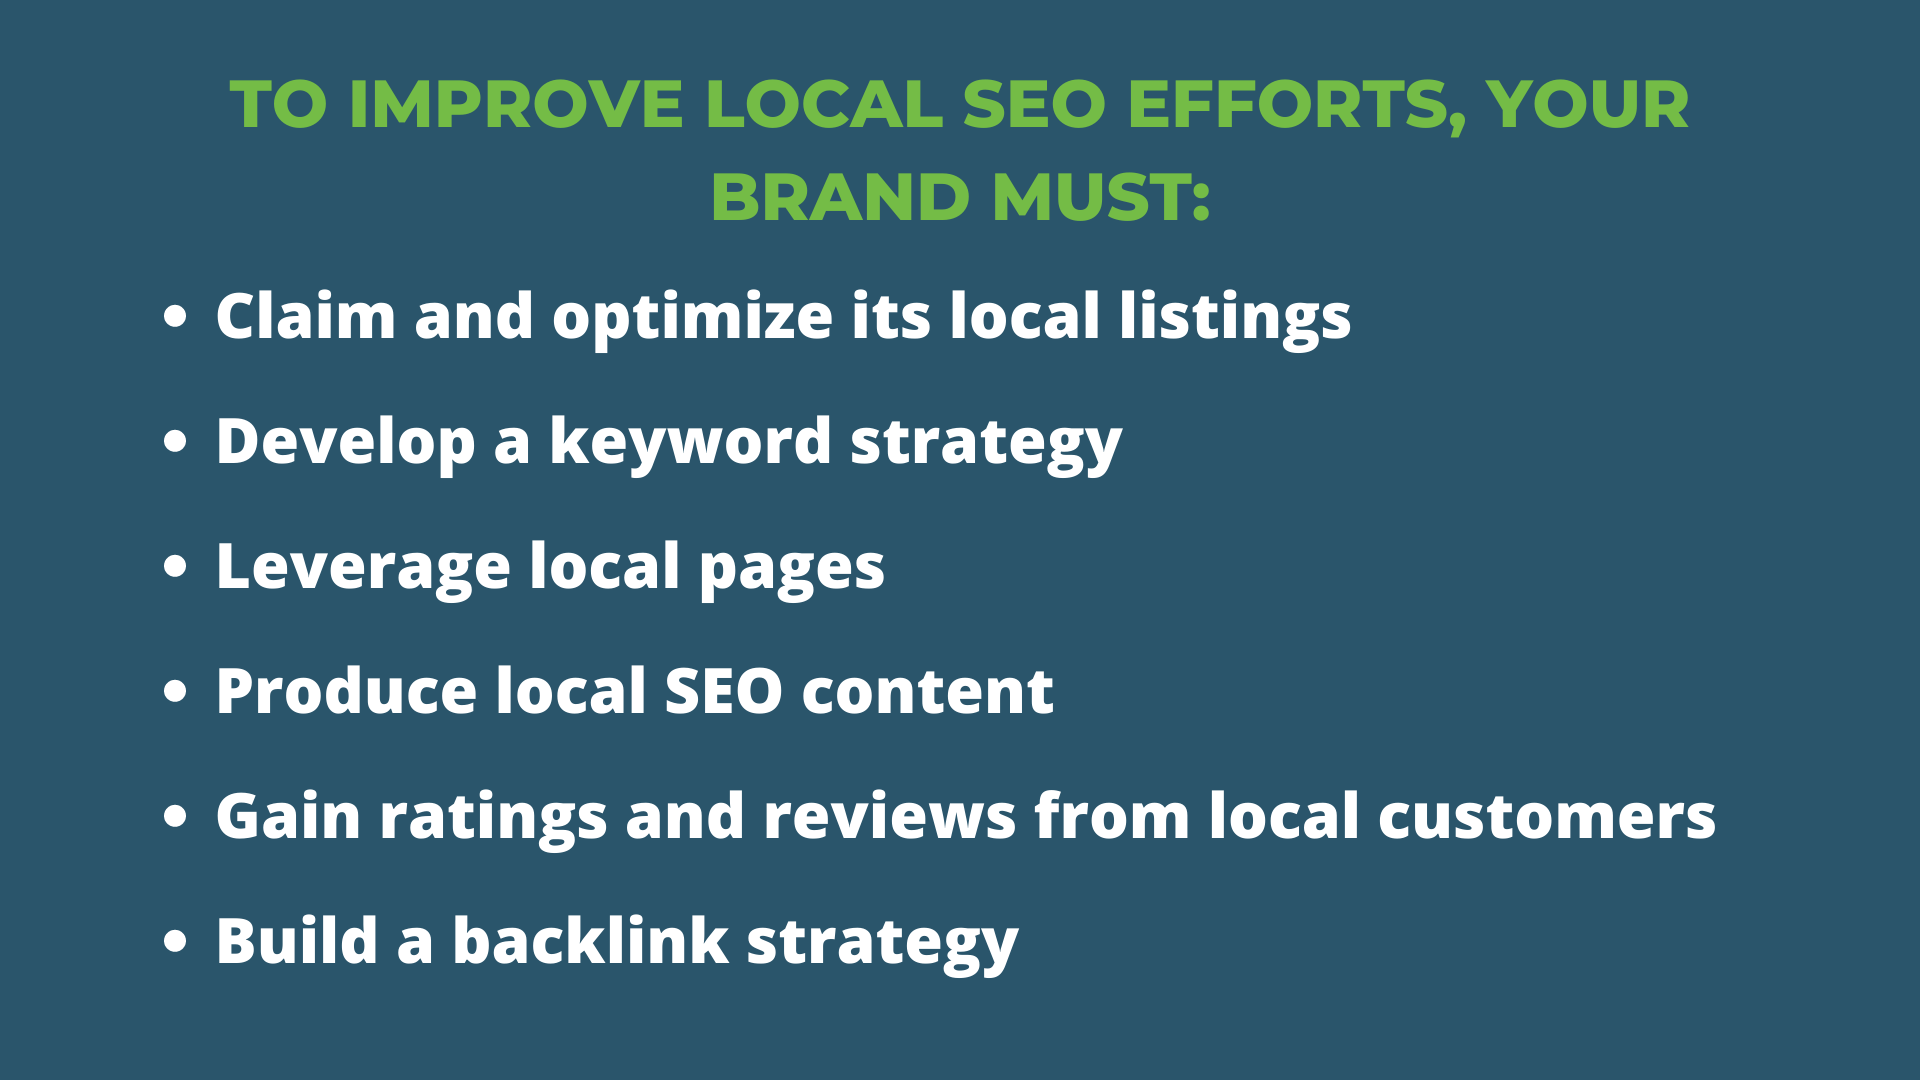 A list of ways marketers can improve their local SEO efforts